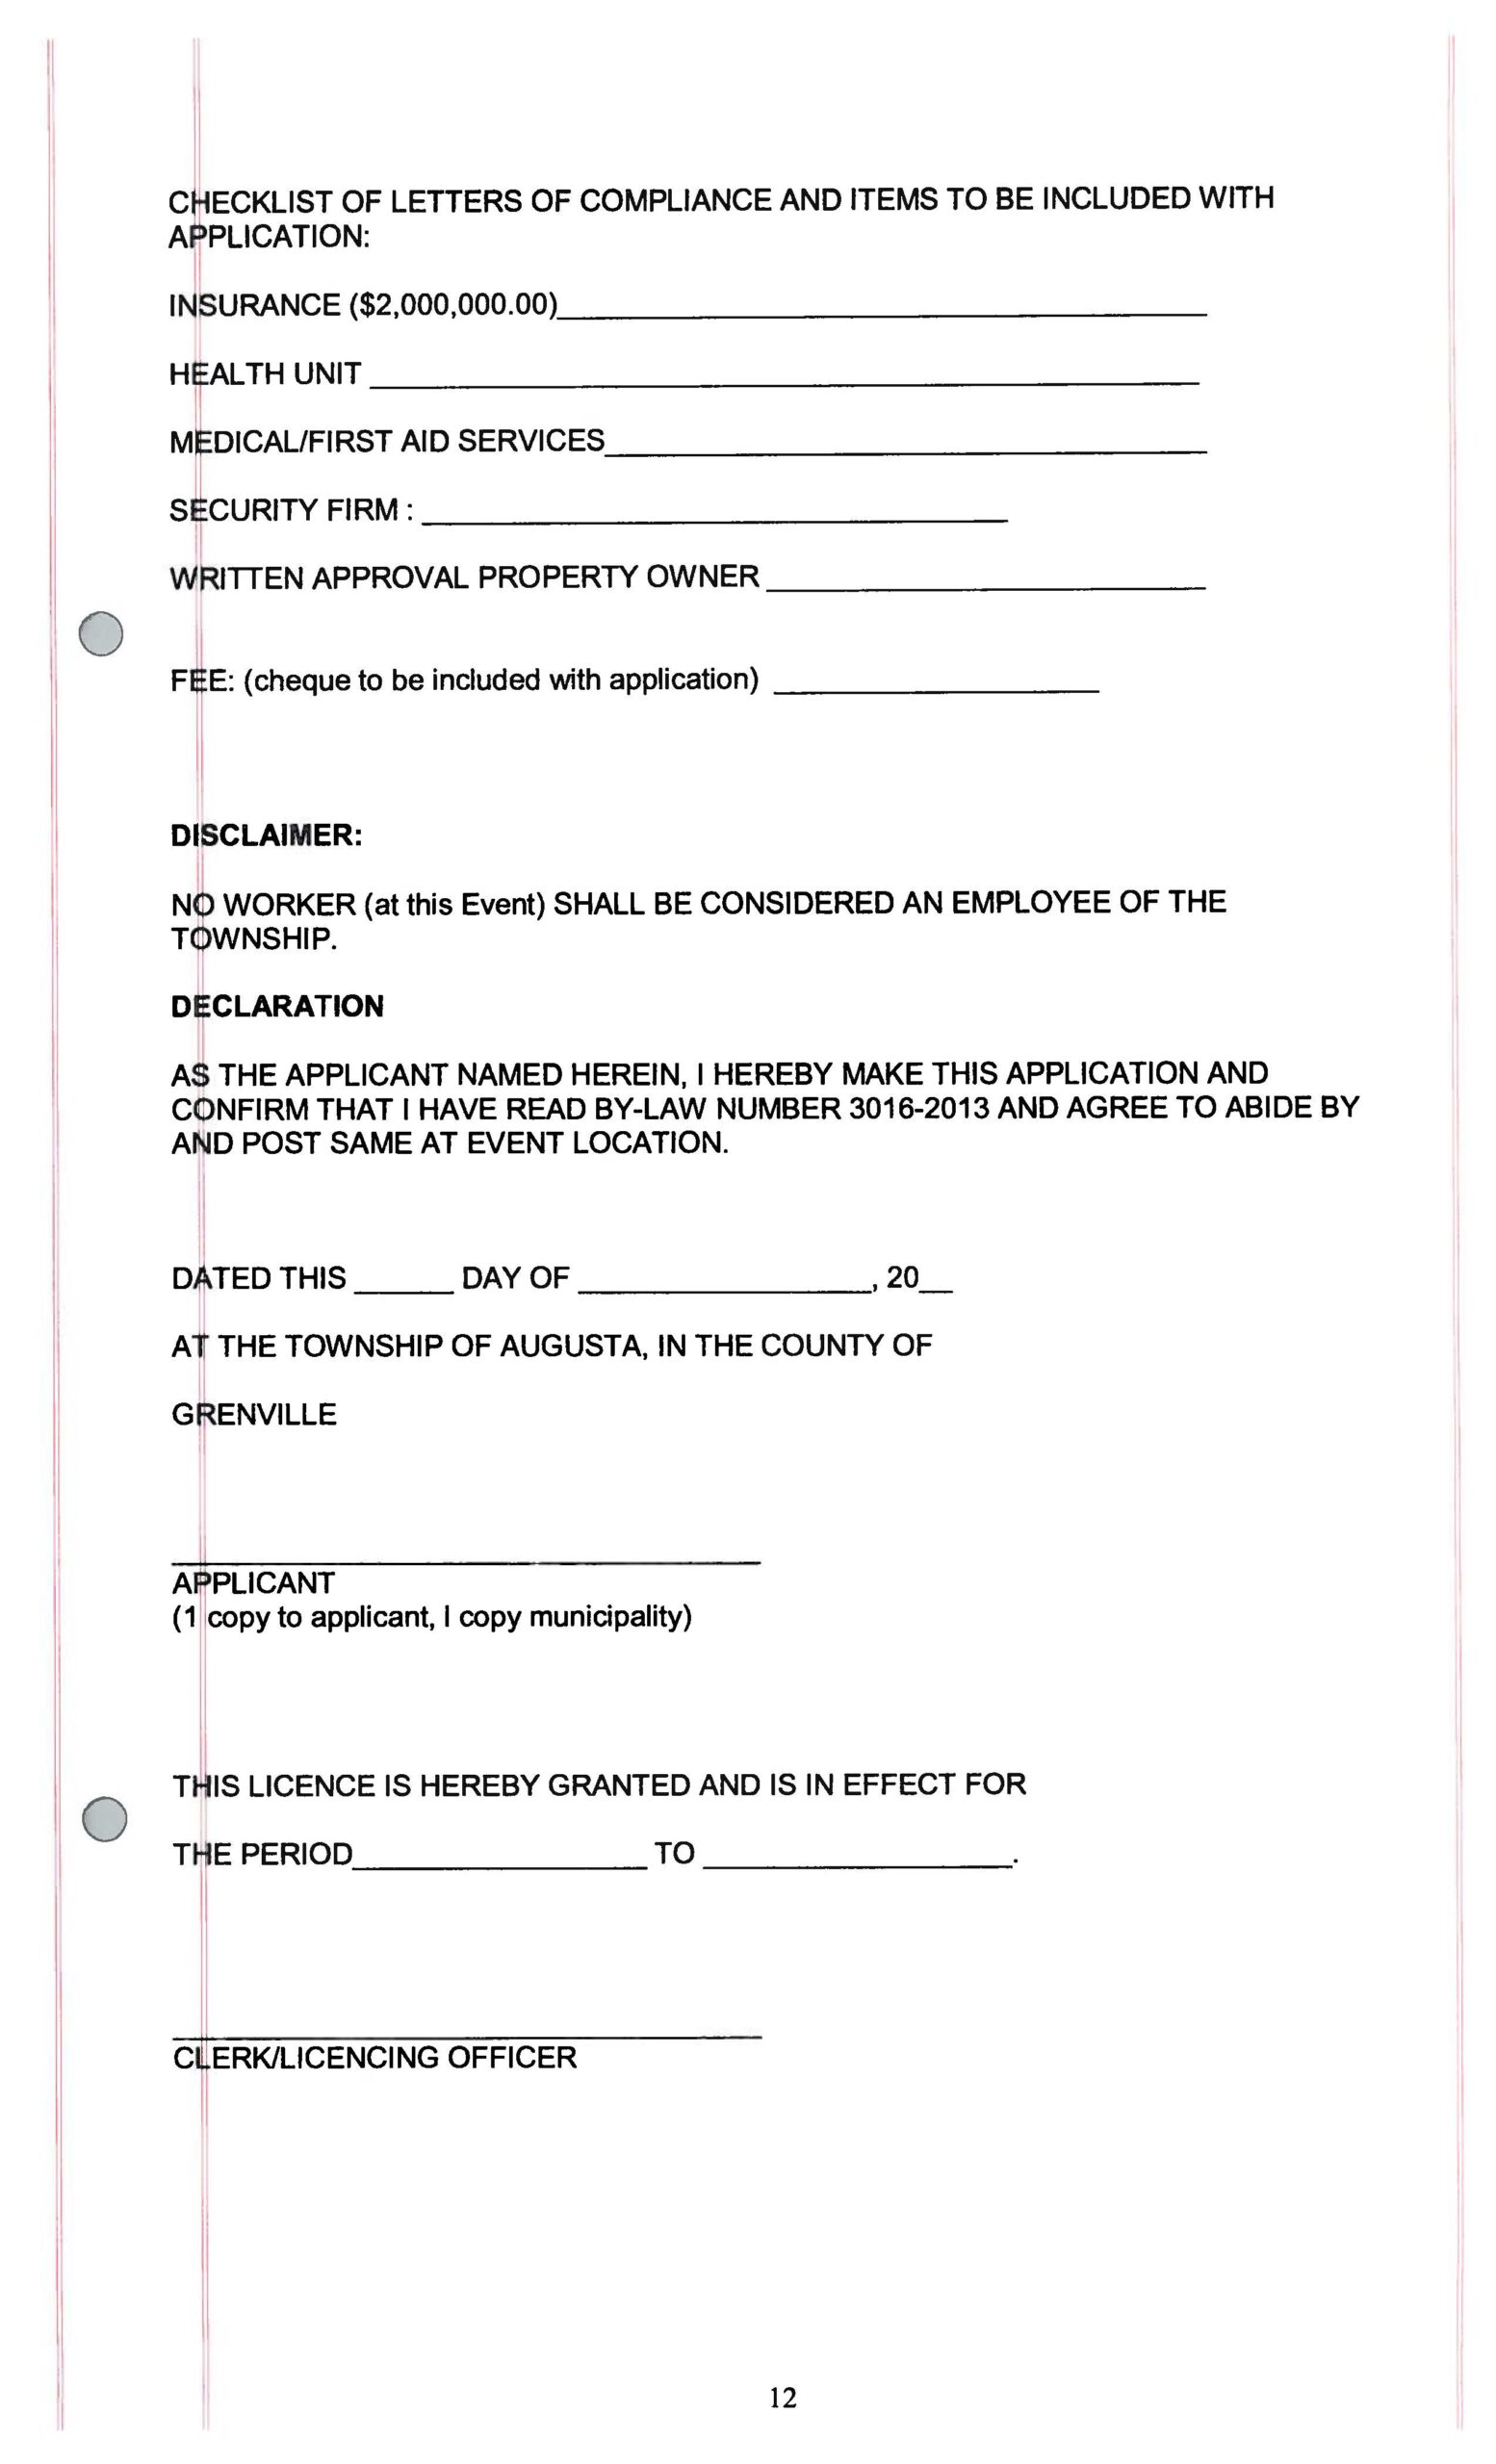 application form page 03